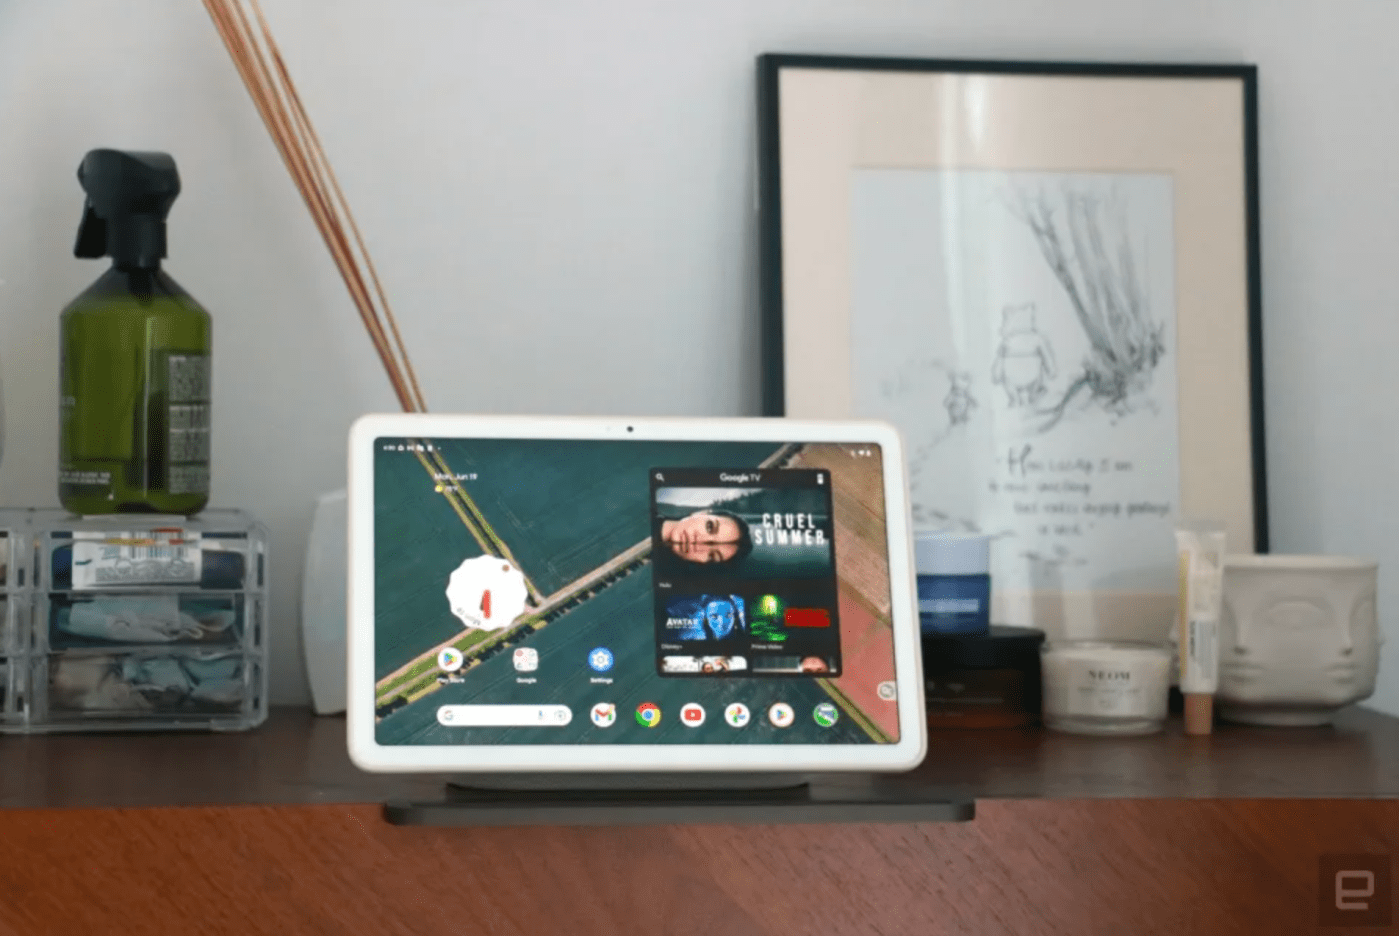 You can now buy a Pixel Tablet without a dock for $400, if that’s your bag